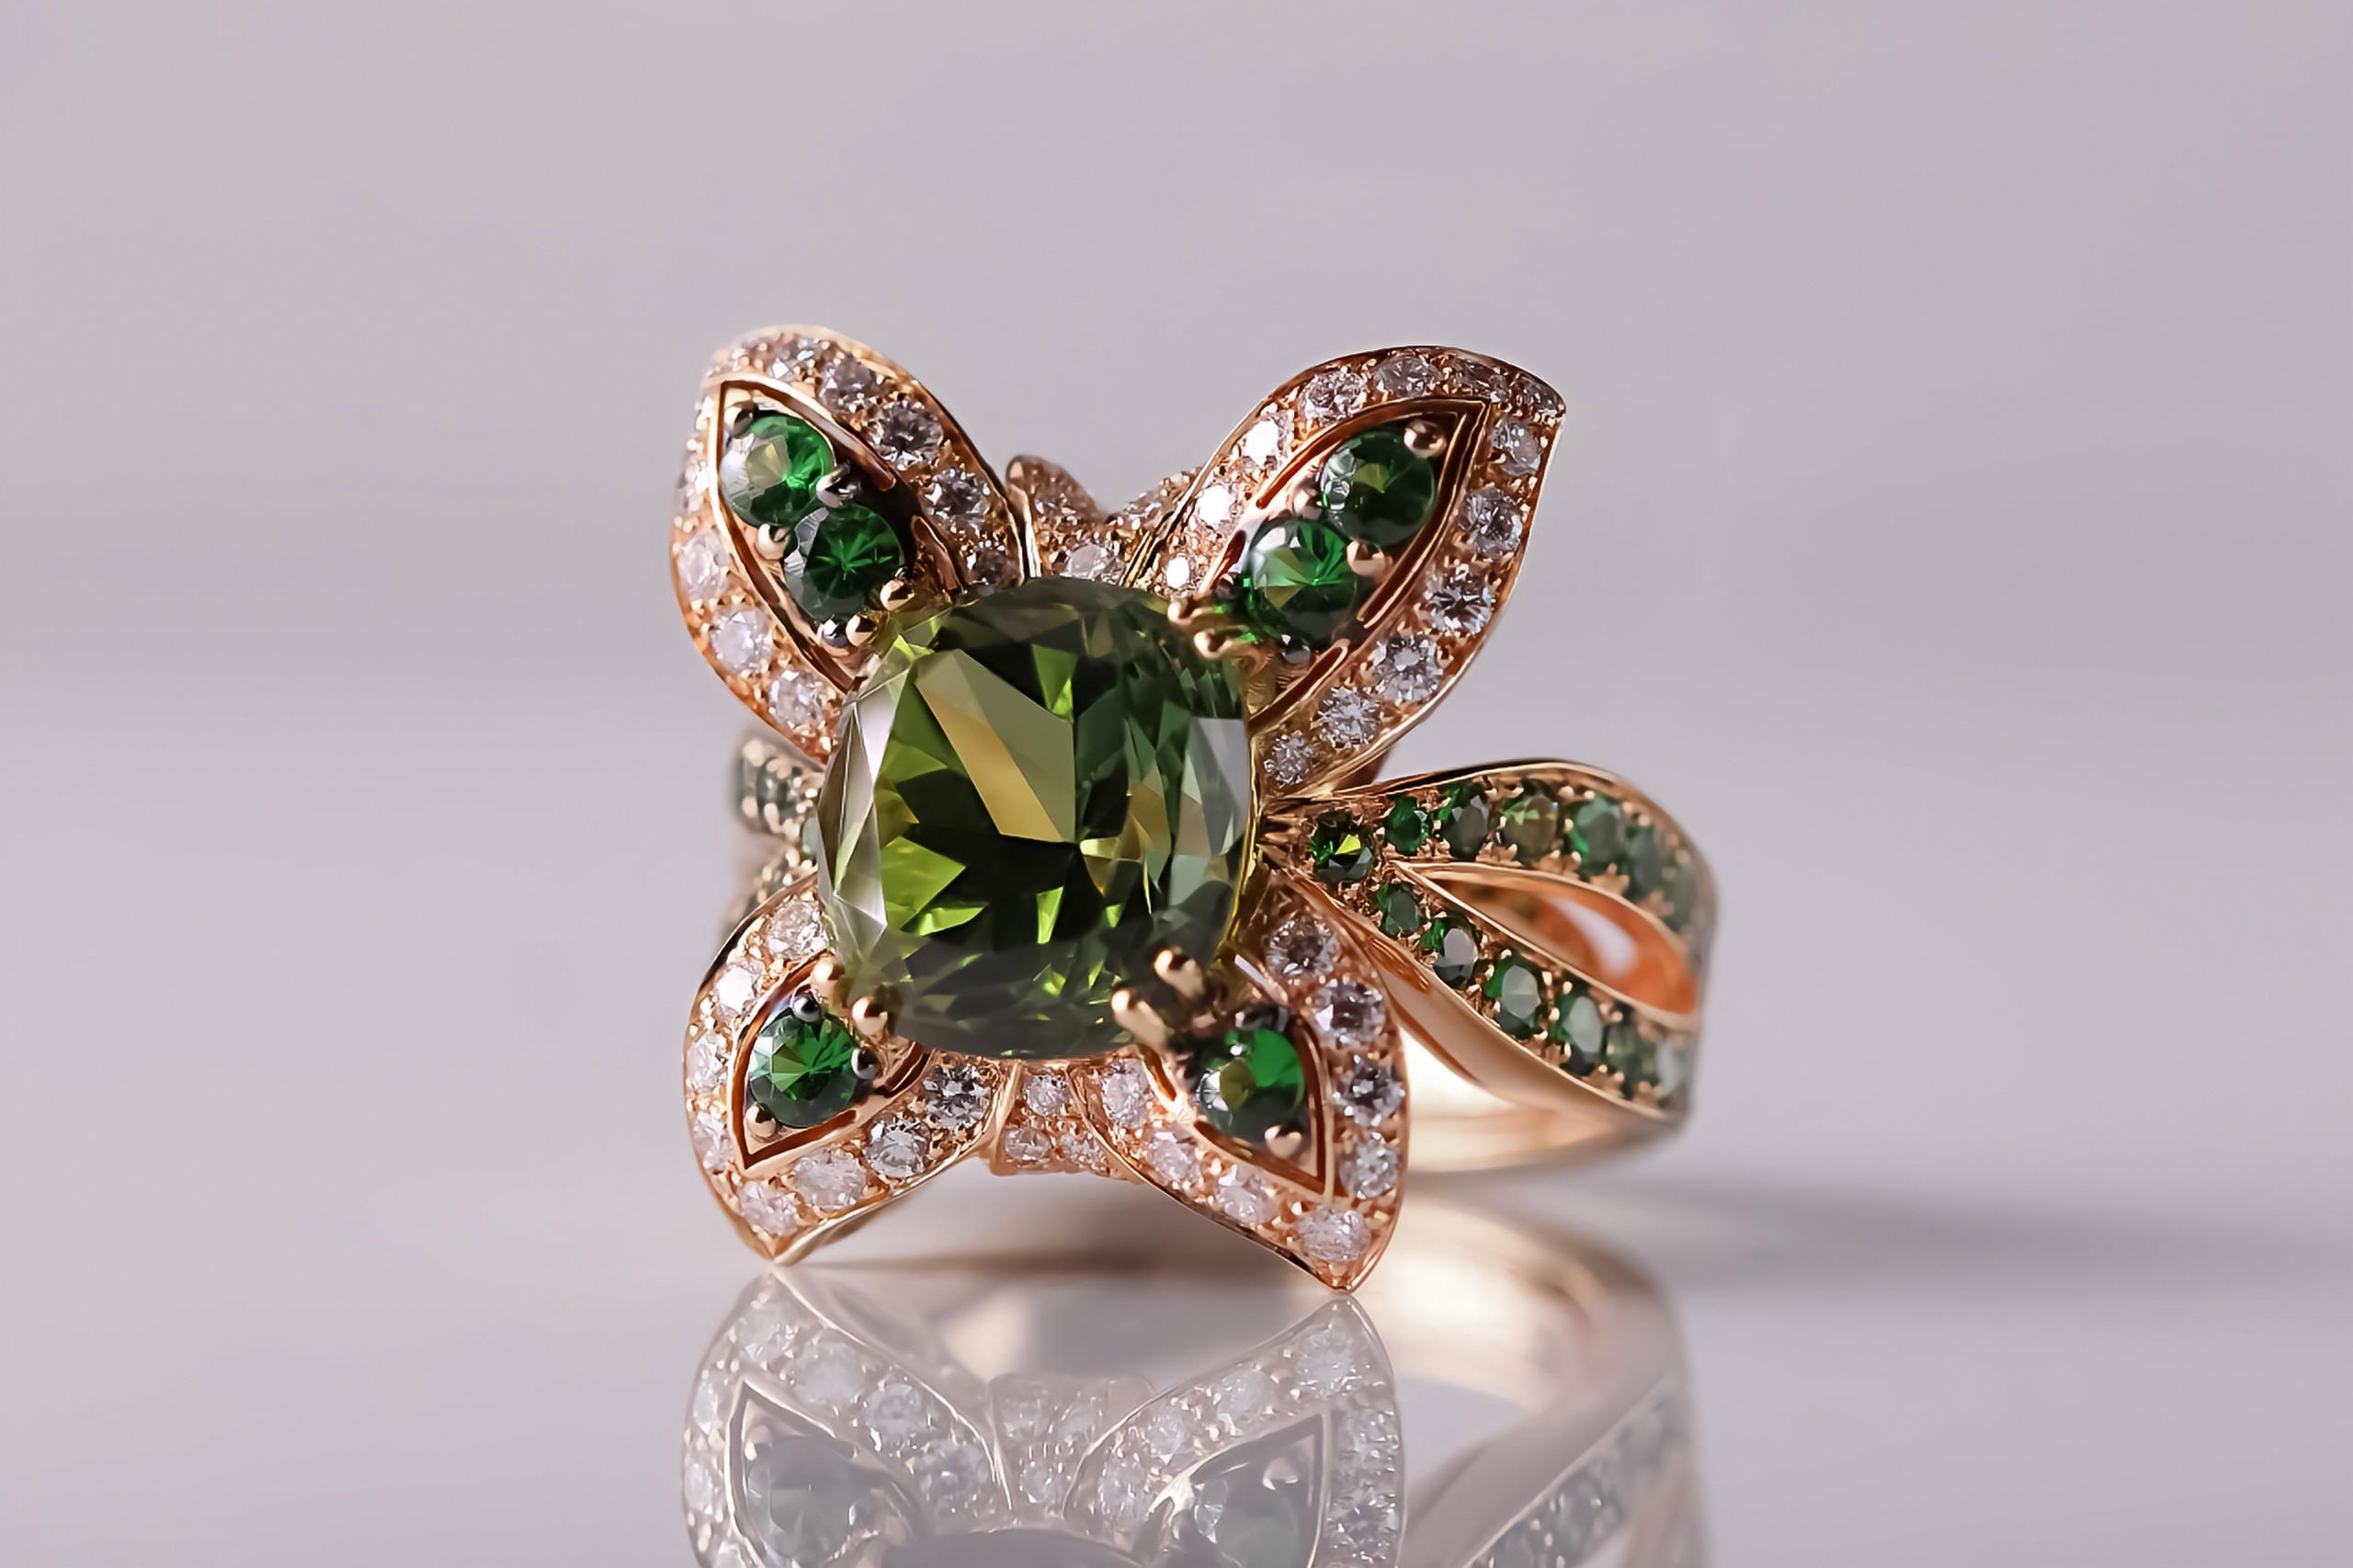 This charming 18kt rose gold ring is a designer jewel made in Florence, Italy. Its enchanting butterfly motif captures the imagination with elegance and grace.

At the centre of the ring shines a cushion-cut natural green Tourmaline from Madagascar,